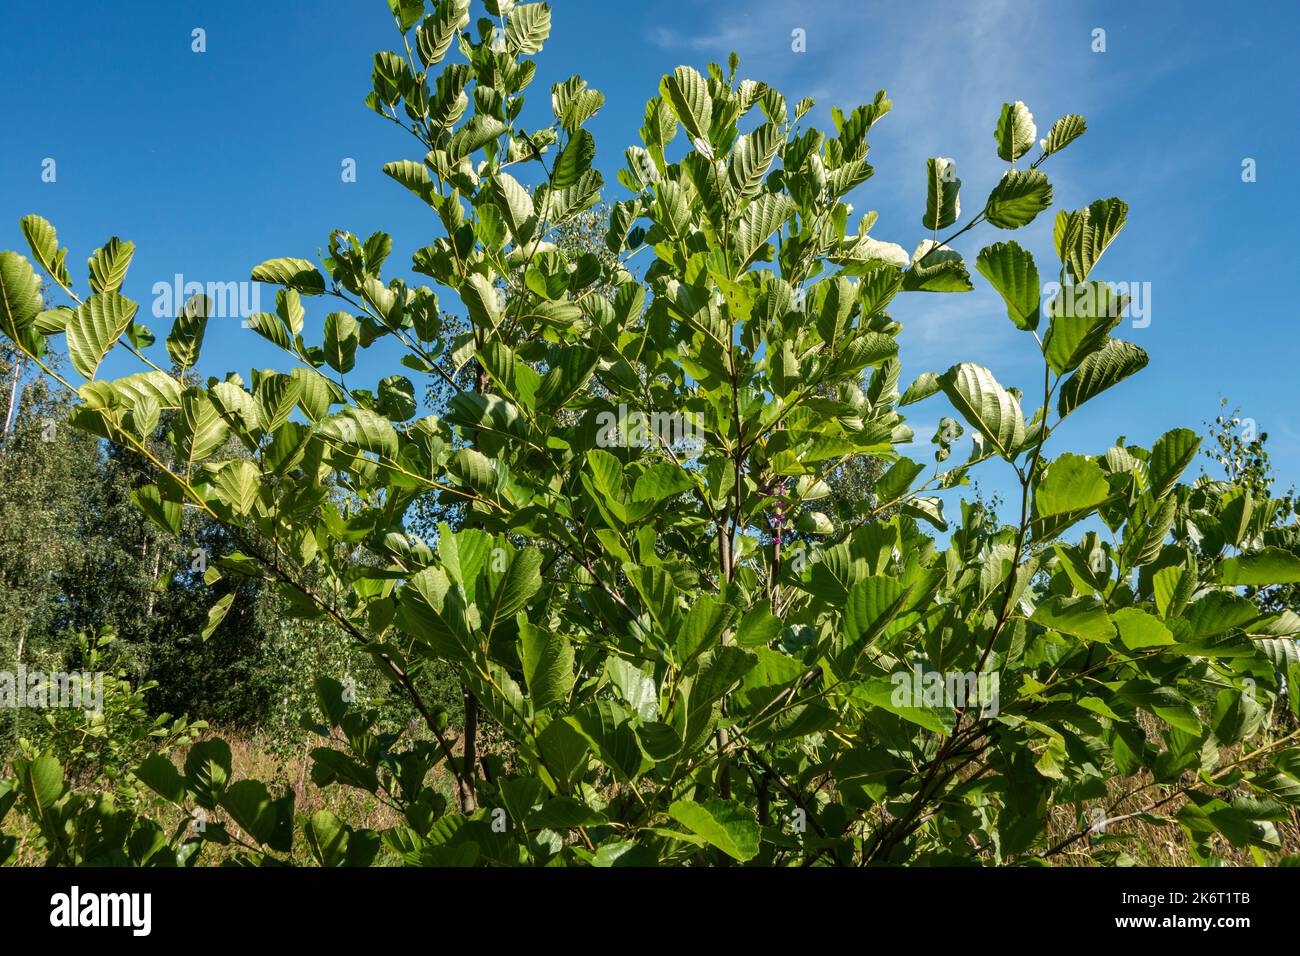 A young alder tree with beautiful green foliage on branches. Nature - close-up tree Stock Photo